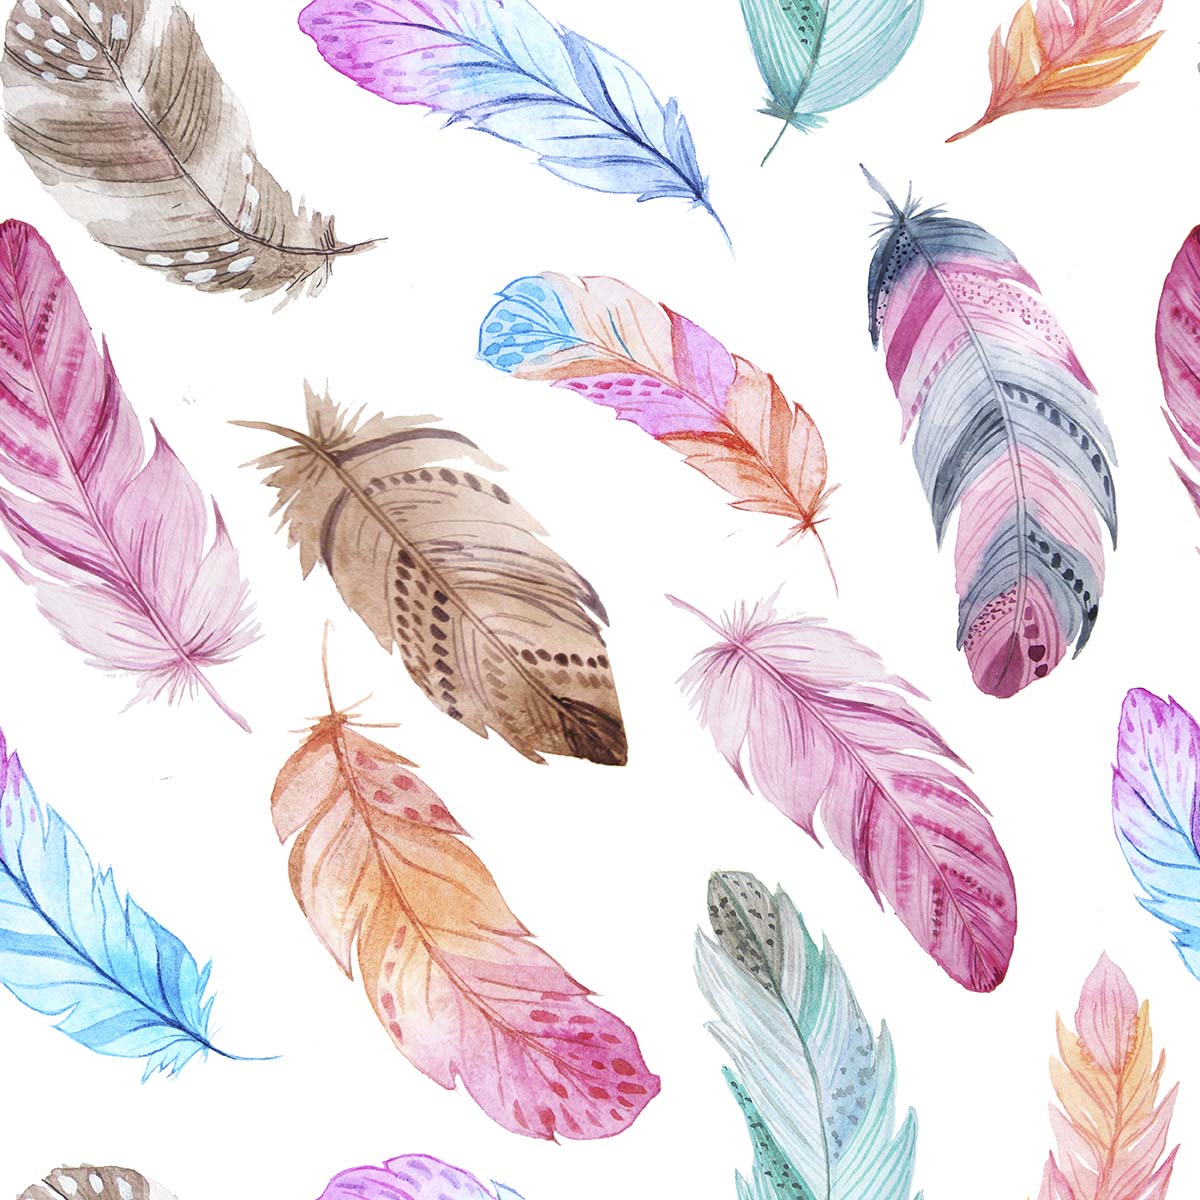 A pattern of colorful feathers